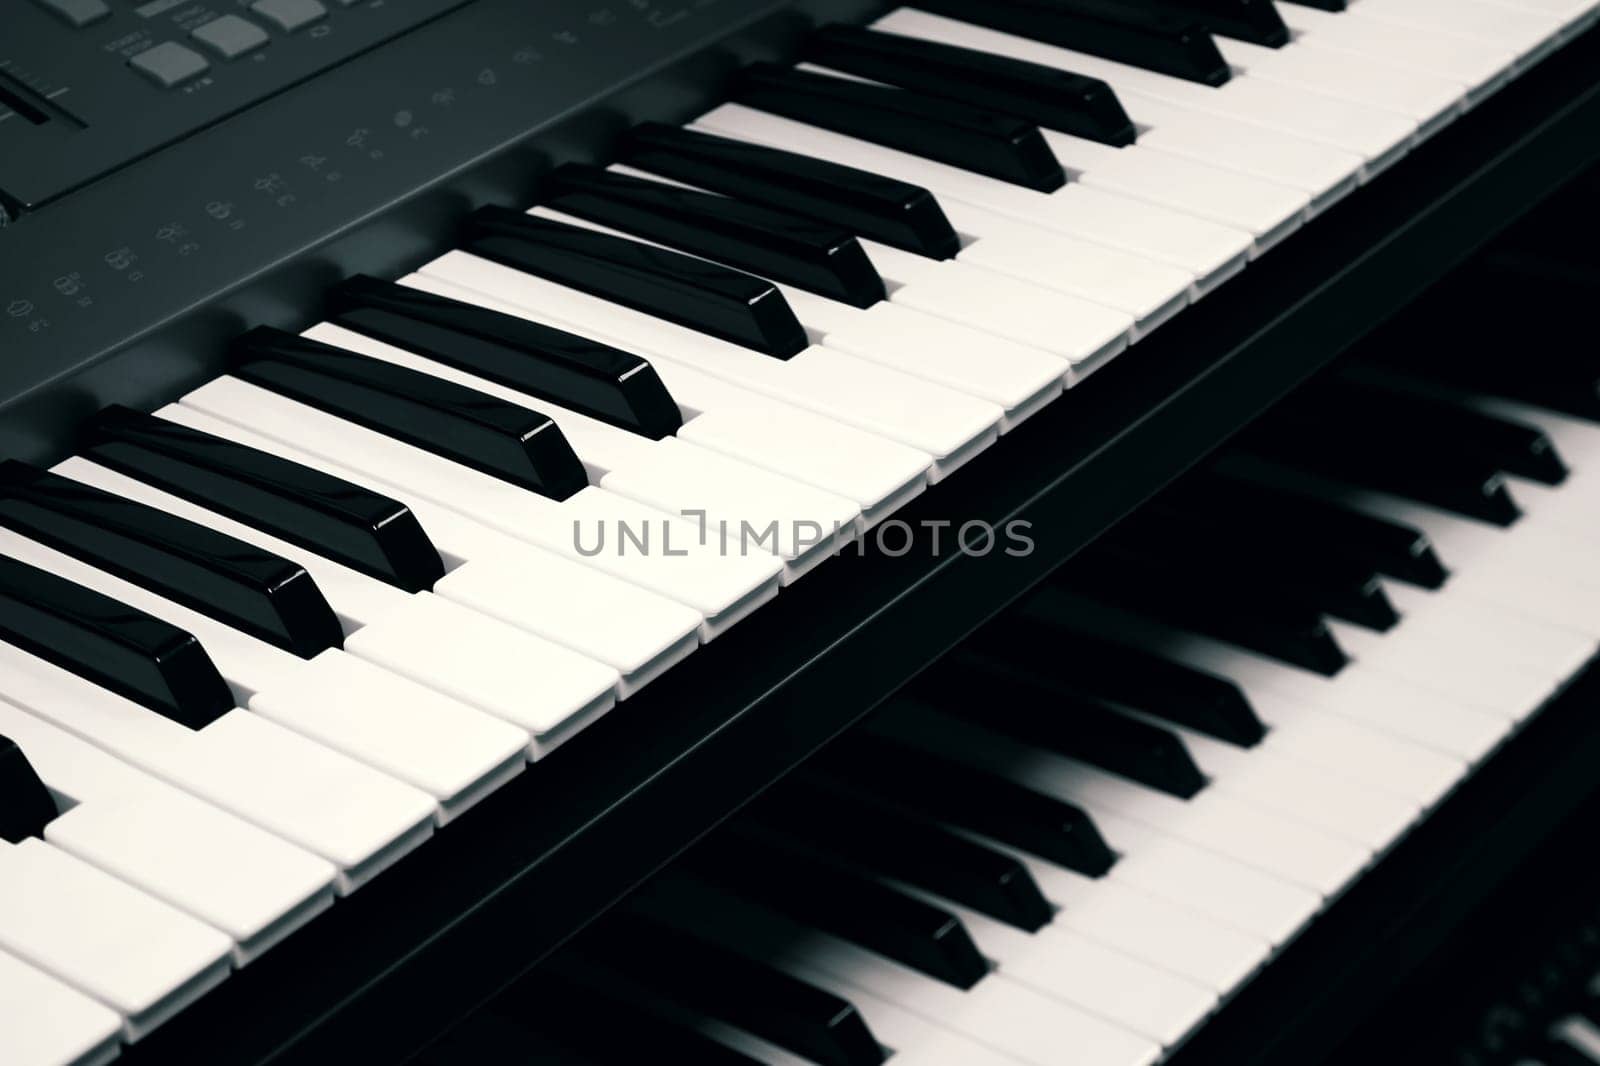 Digital piano keyboards close up, toned in black and white